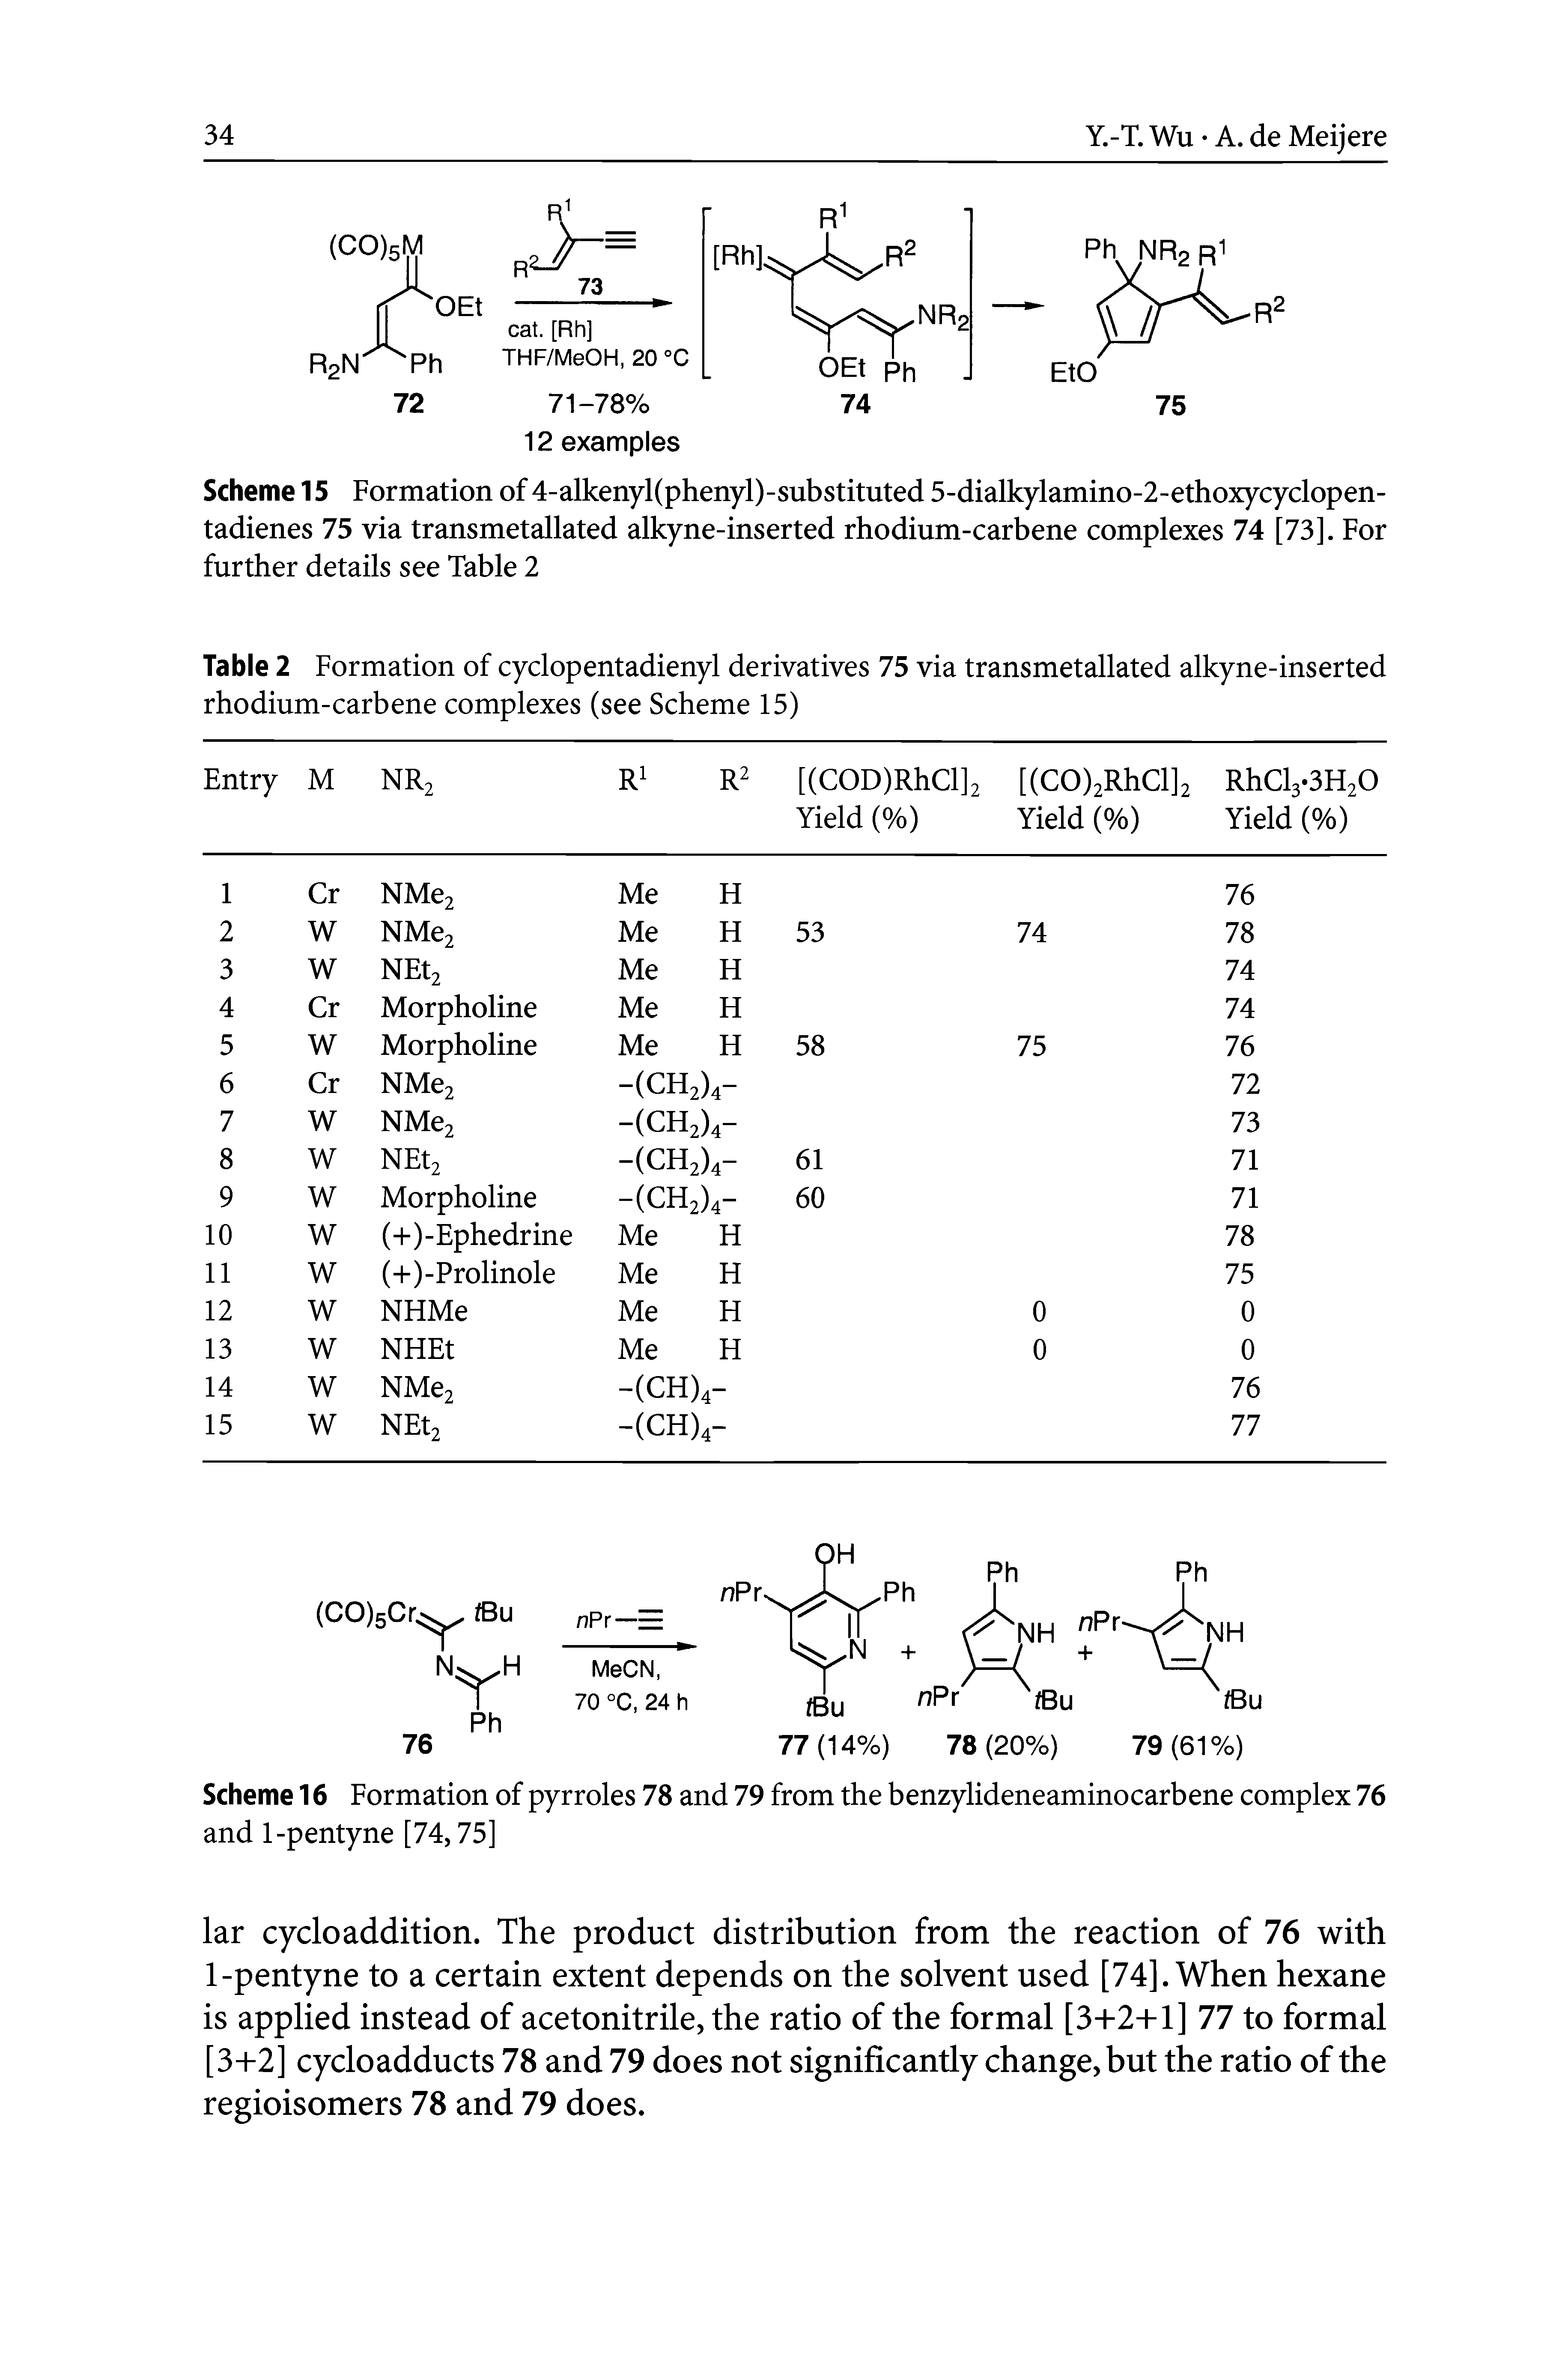 Table 2 Formation of cyclopentadienyl derivatives 75 via transmetallated alkyne-inserted rhodium-carbene complexes (see Scheme 15)...